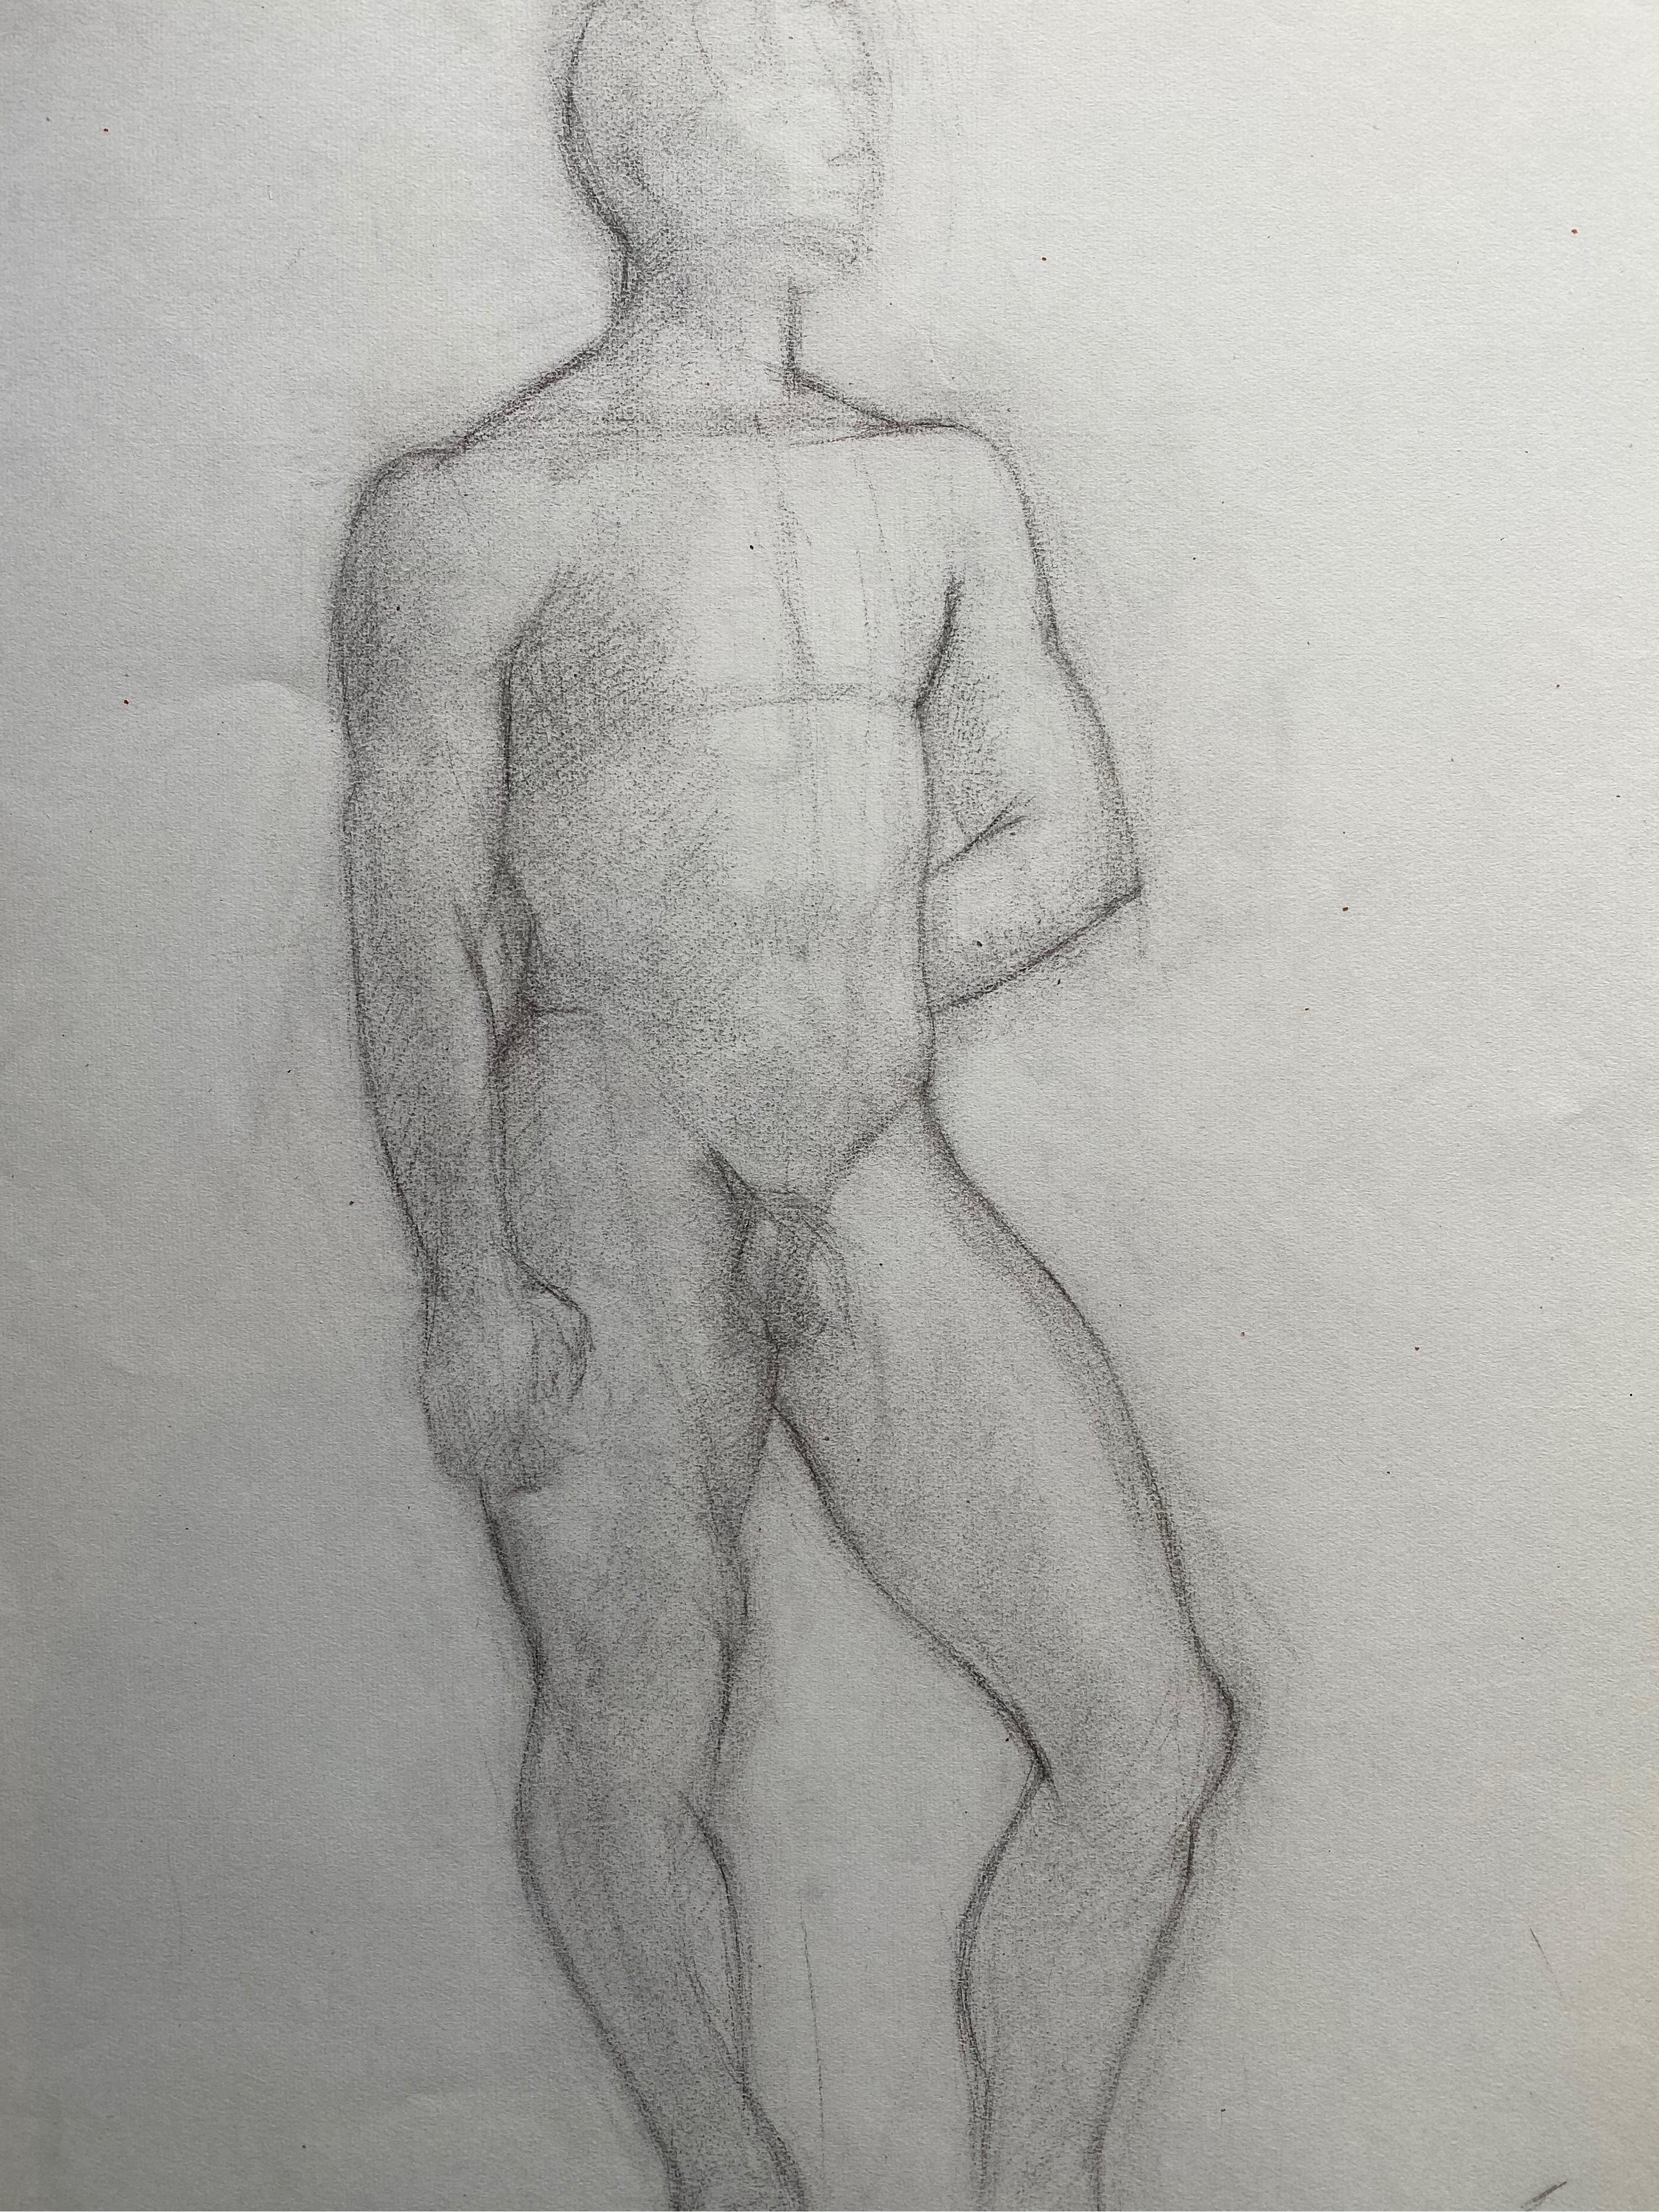 Mid 20th Century French Charcoal Drawing - Portrait of a Standing Nude Man - Art by GENEVIEVE ZONDERVAN (1922-2013)